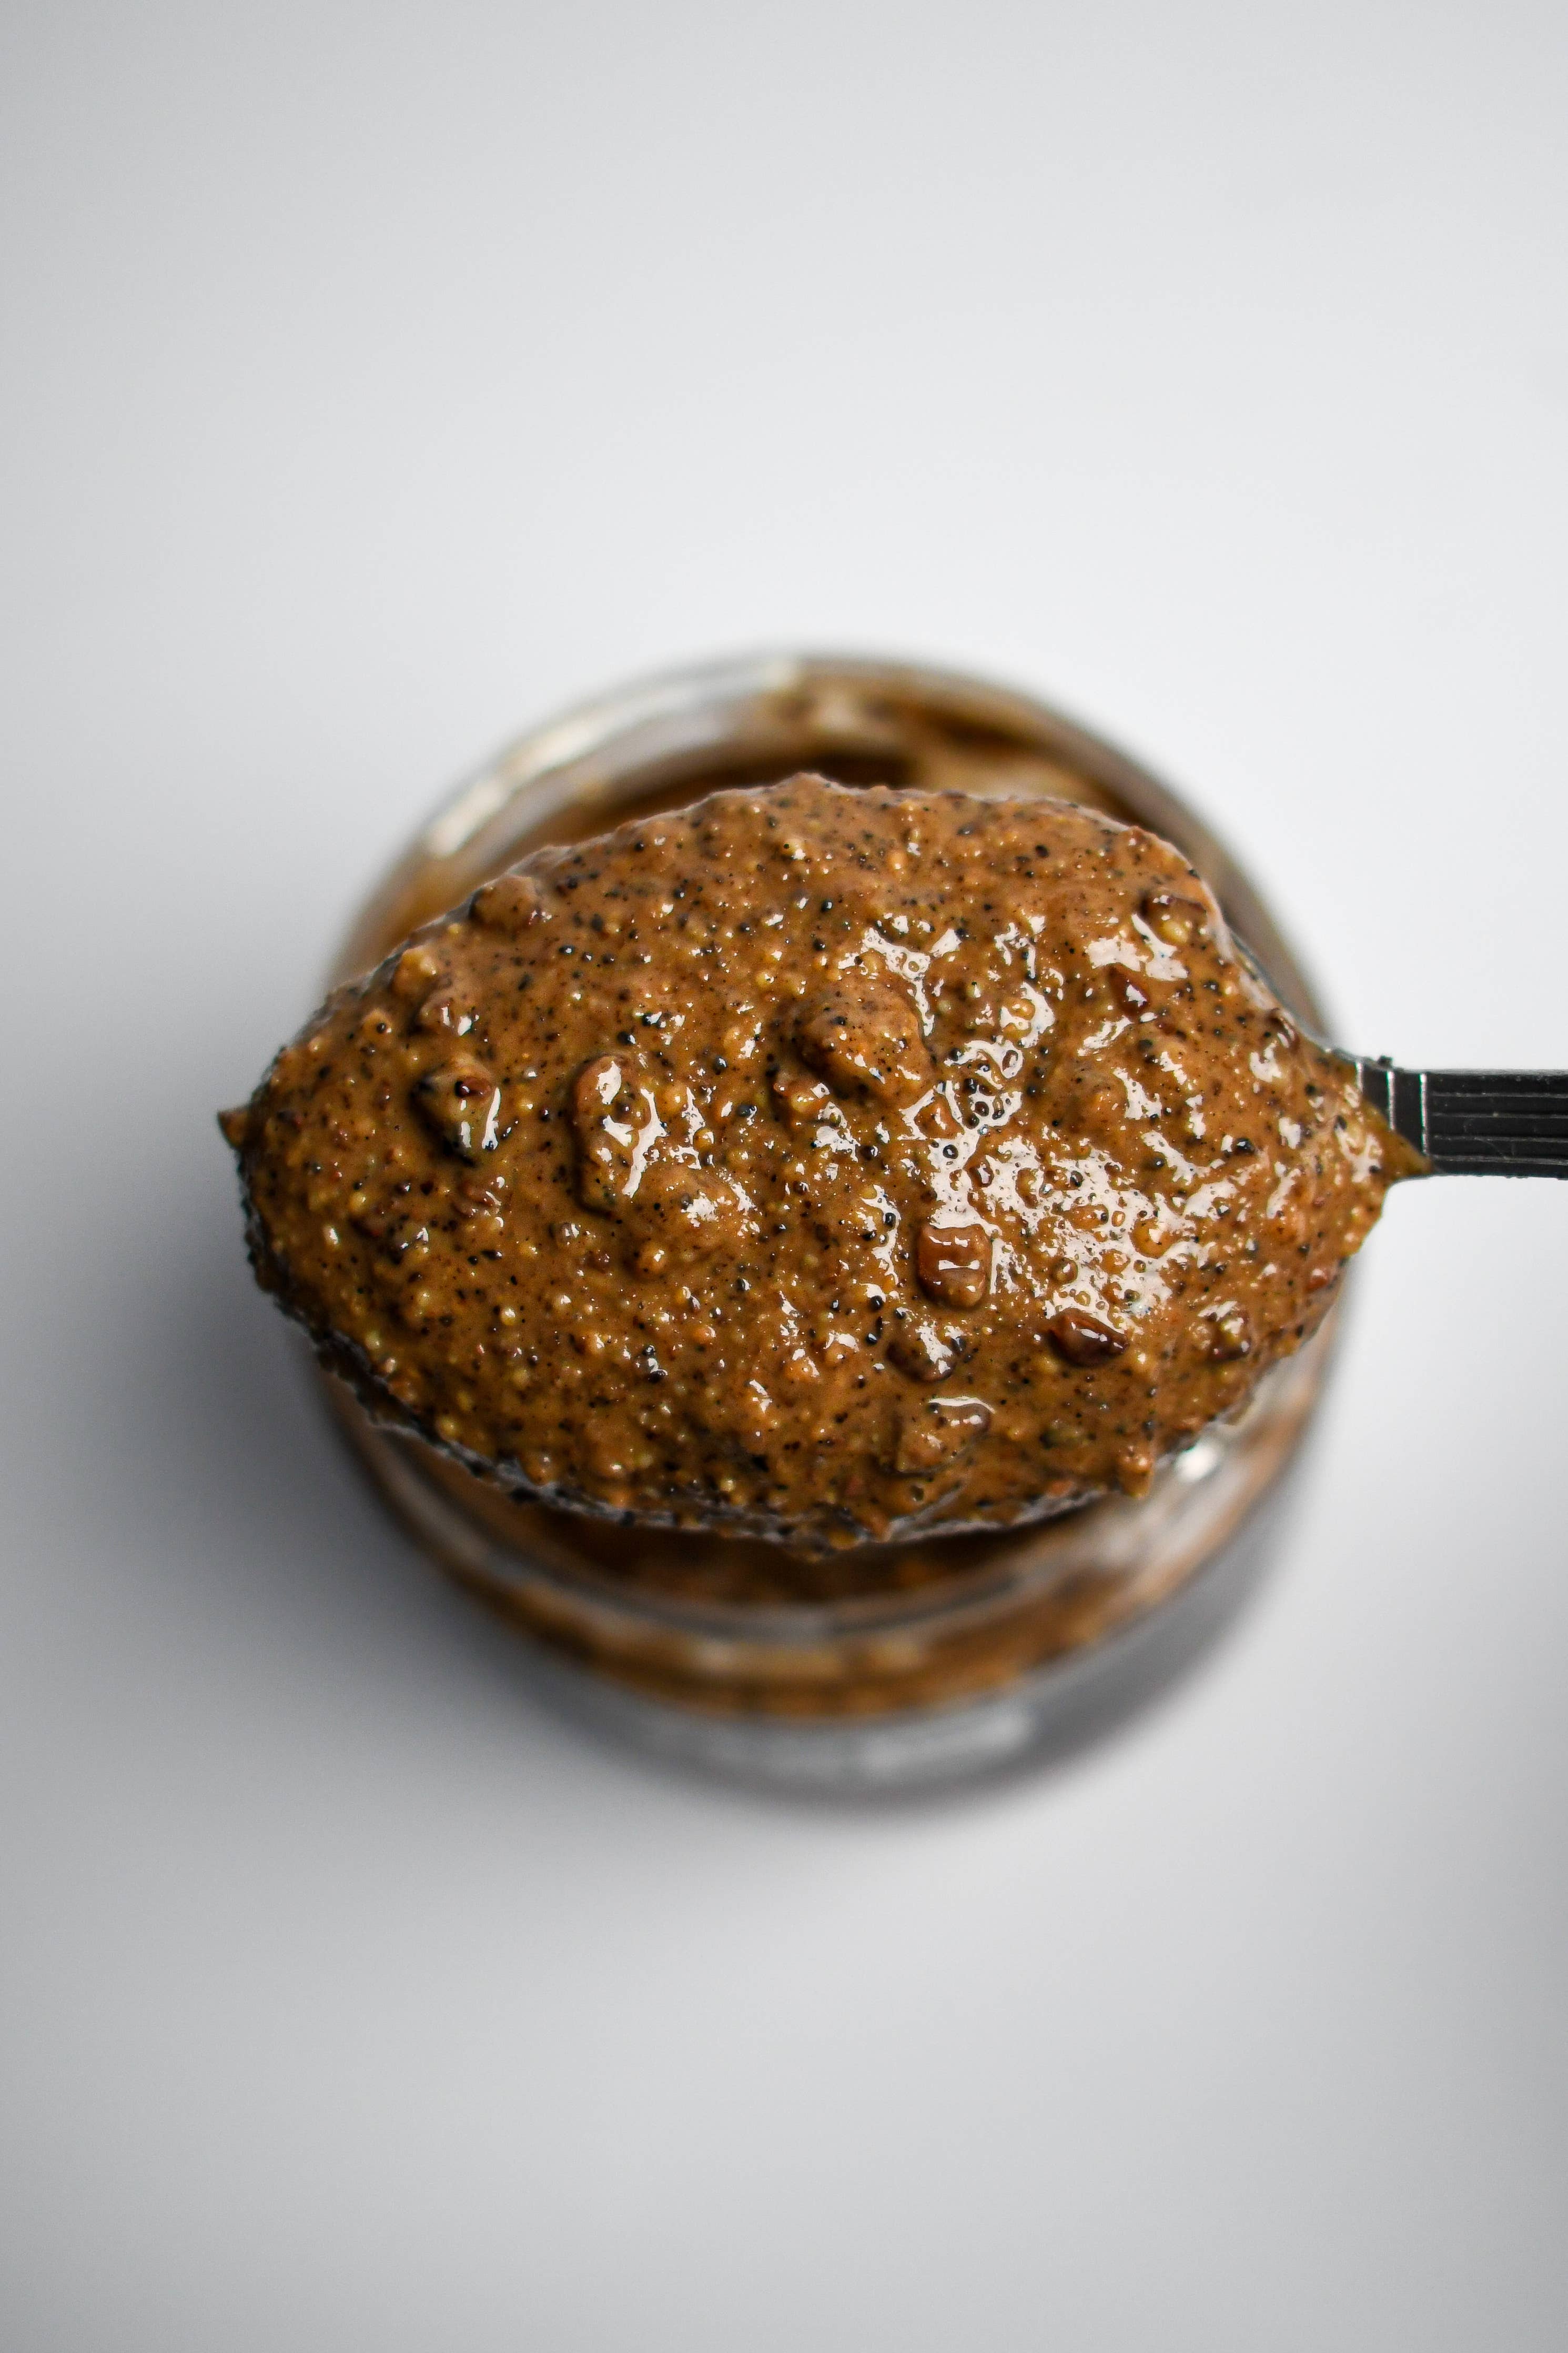 Mixed Up Foods - MUD SEASON - Crunchy Cacao Nib & Coffee Nut Butter with Mapl